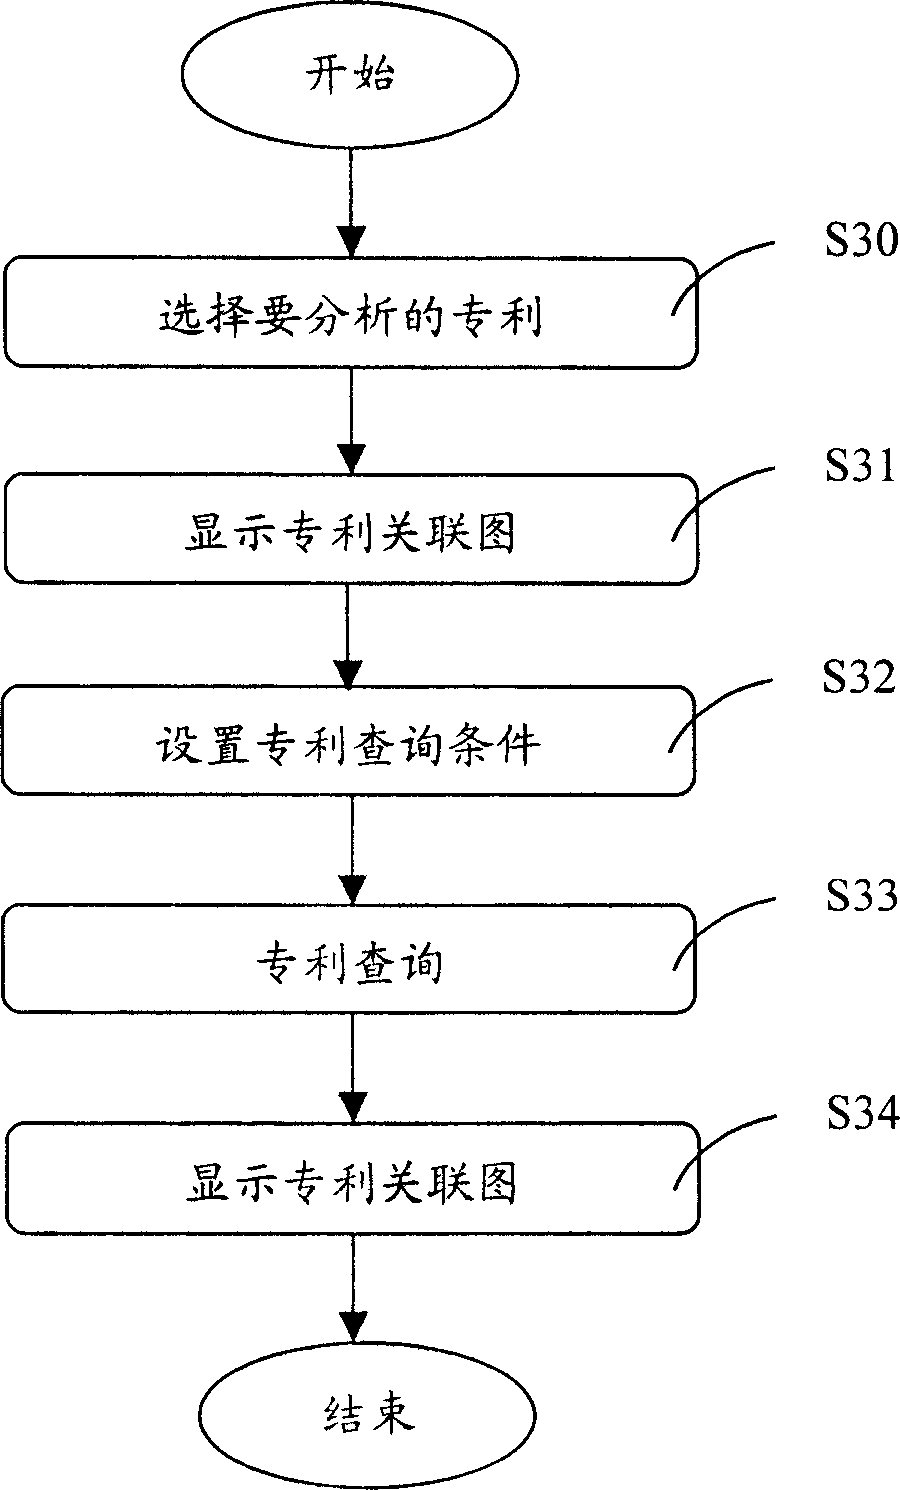 Patent search system and method thereof